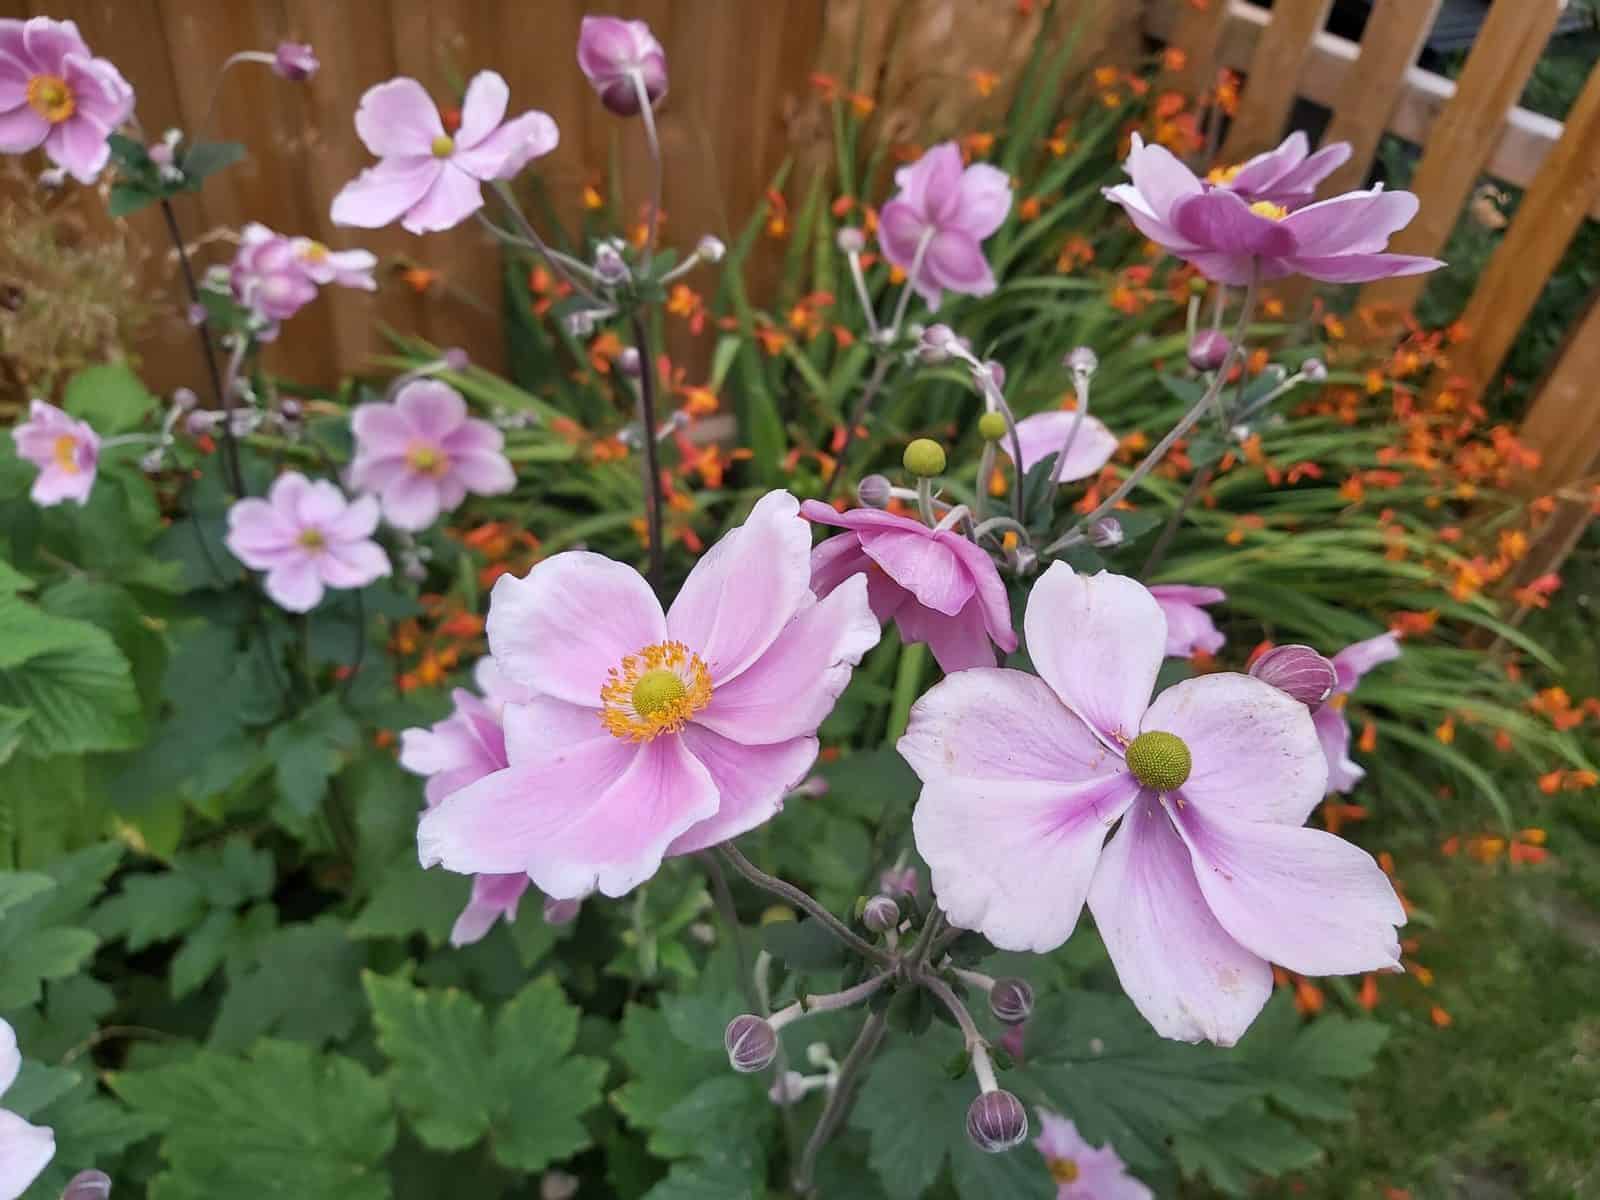 Japanese anemone in the garden by the fence